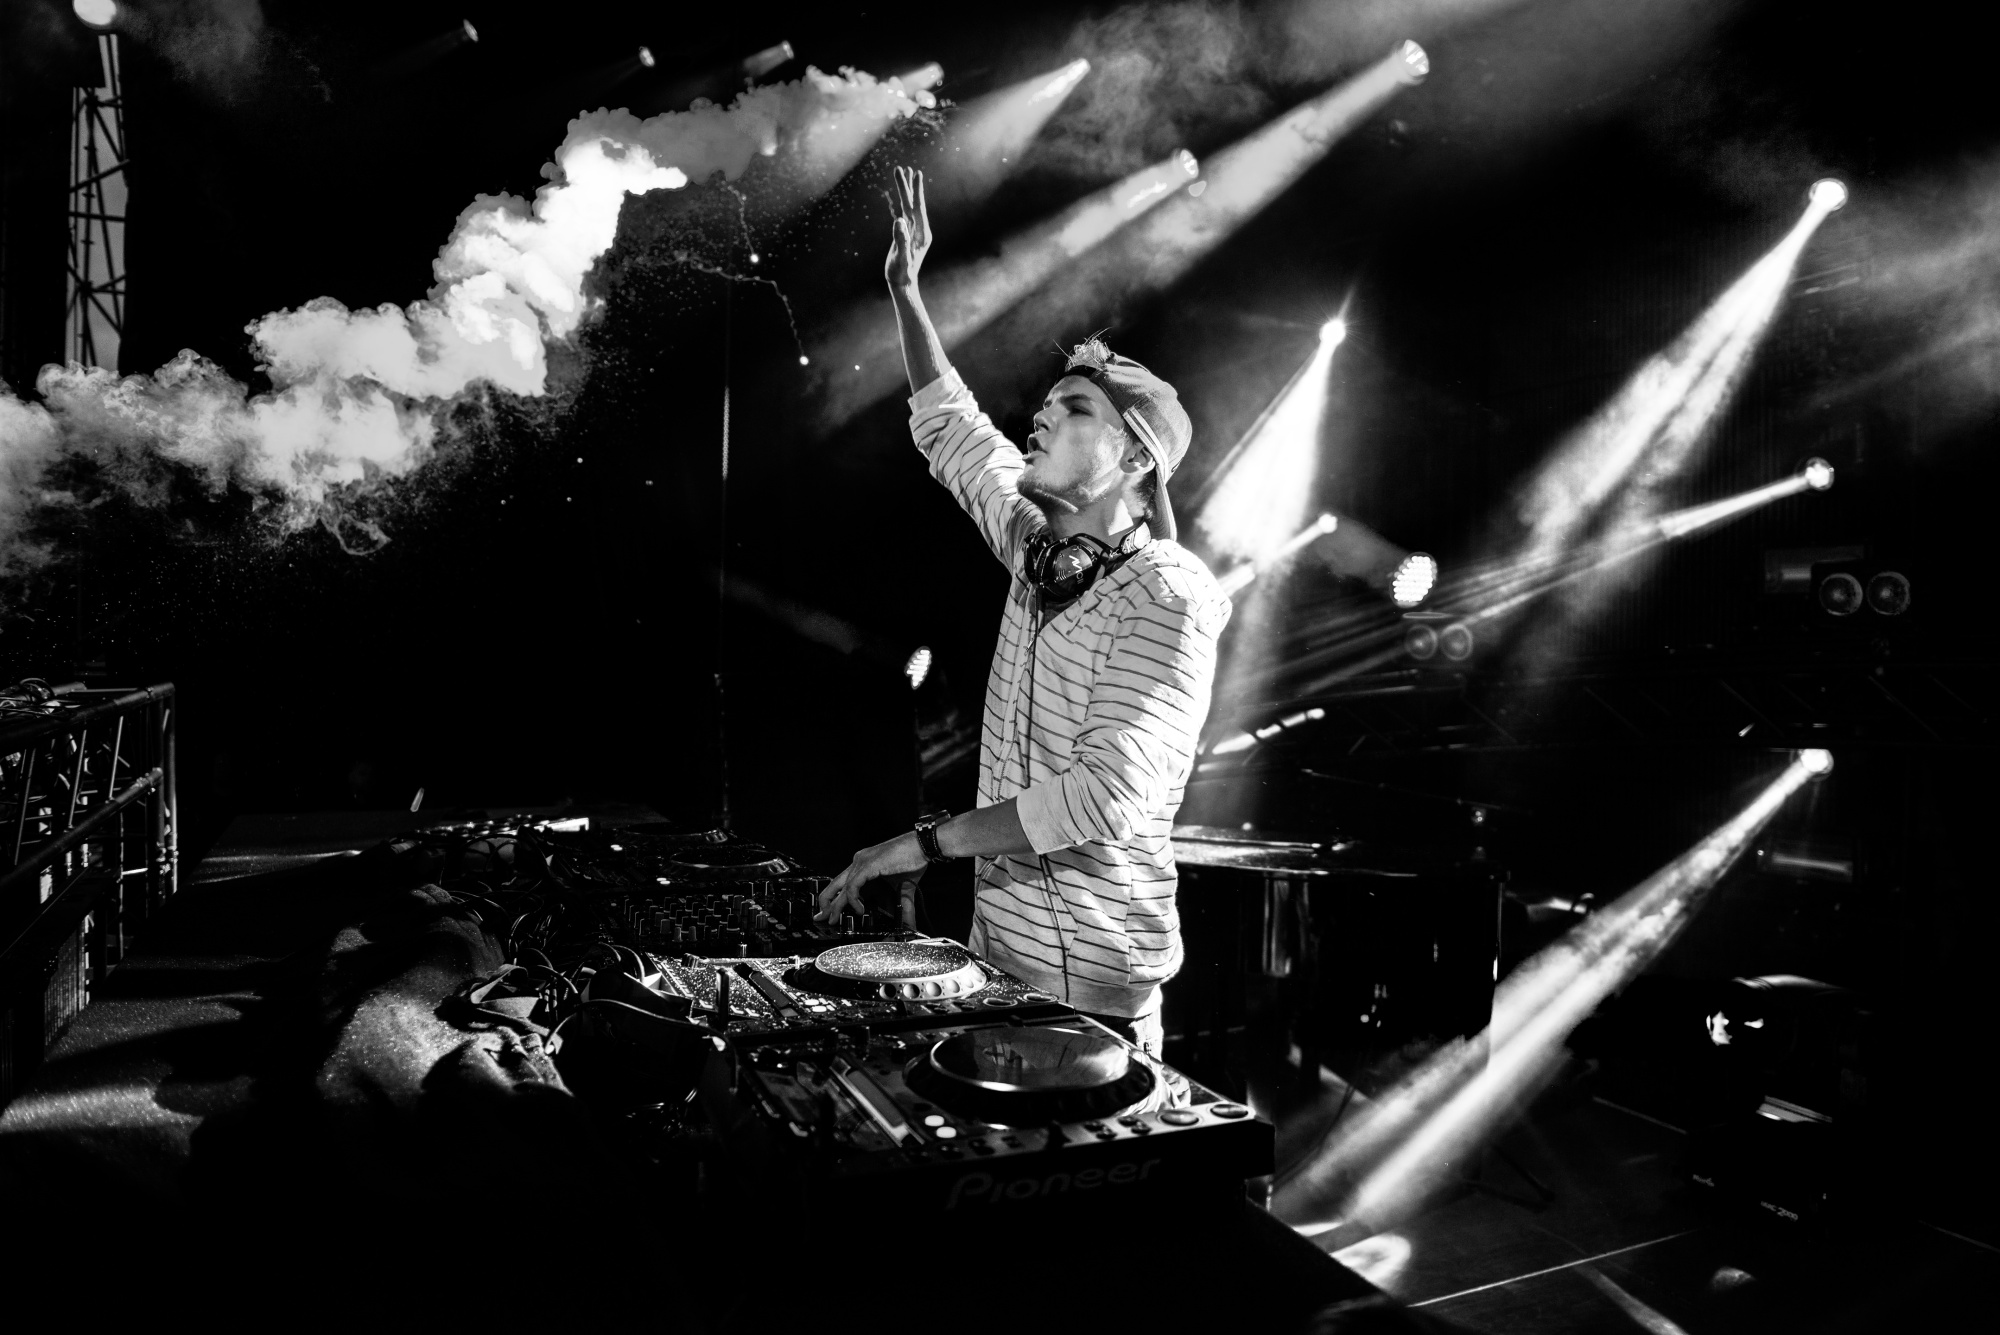 Entertainment Firm Pophouse Buys Most of Avicii’s Back Catalog - Bloomberg